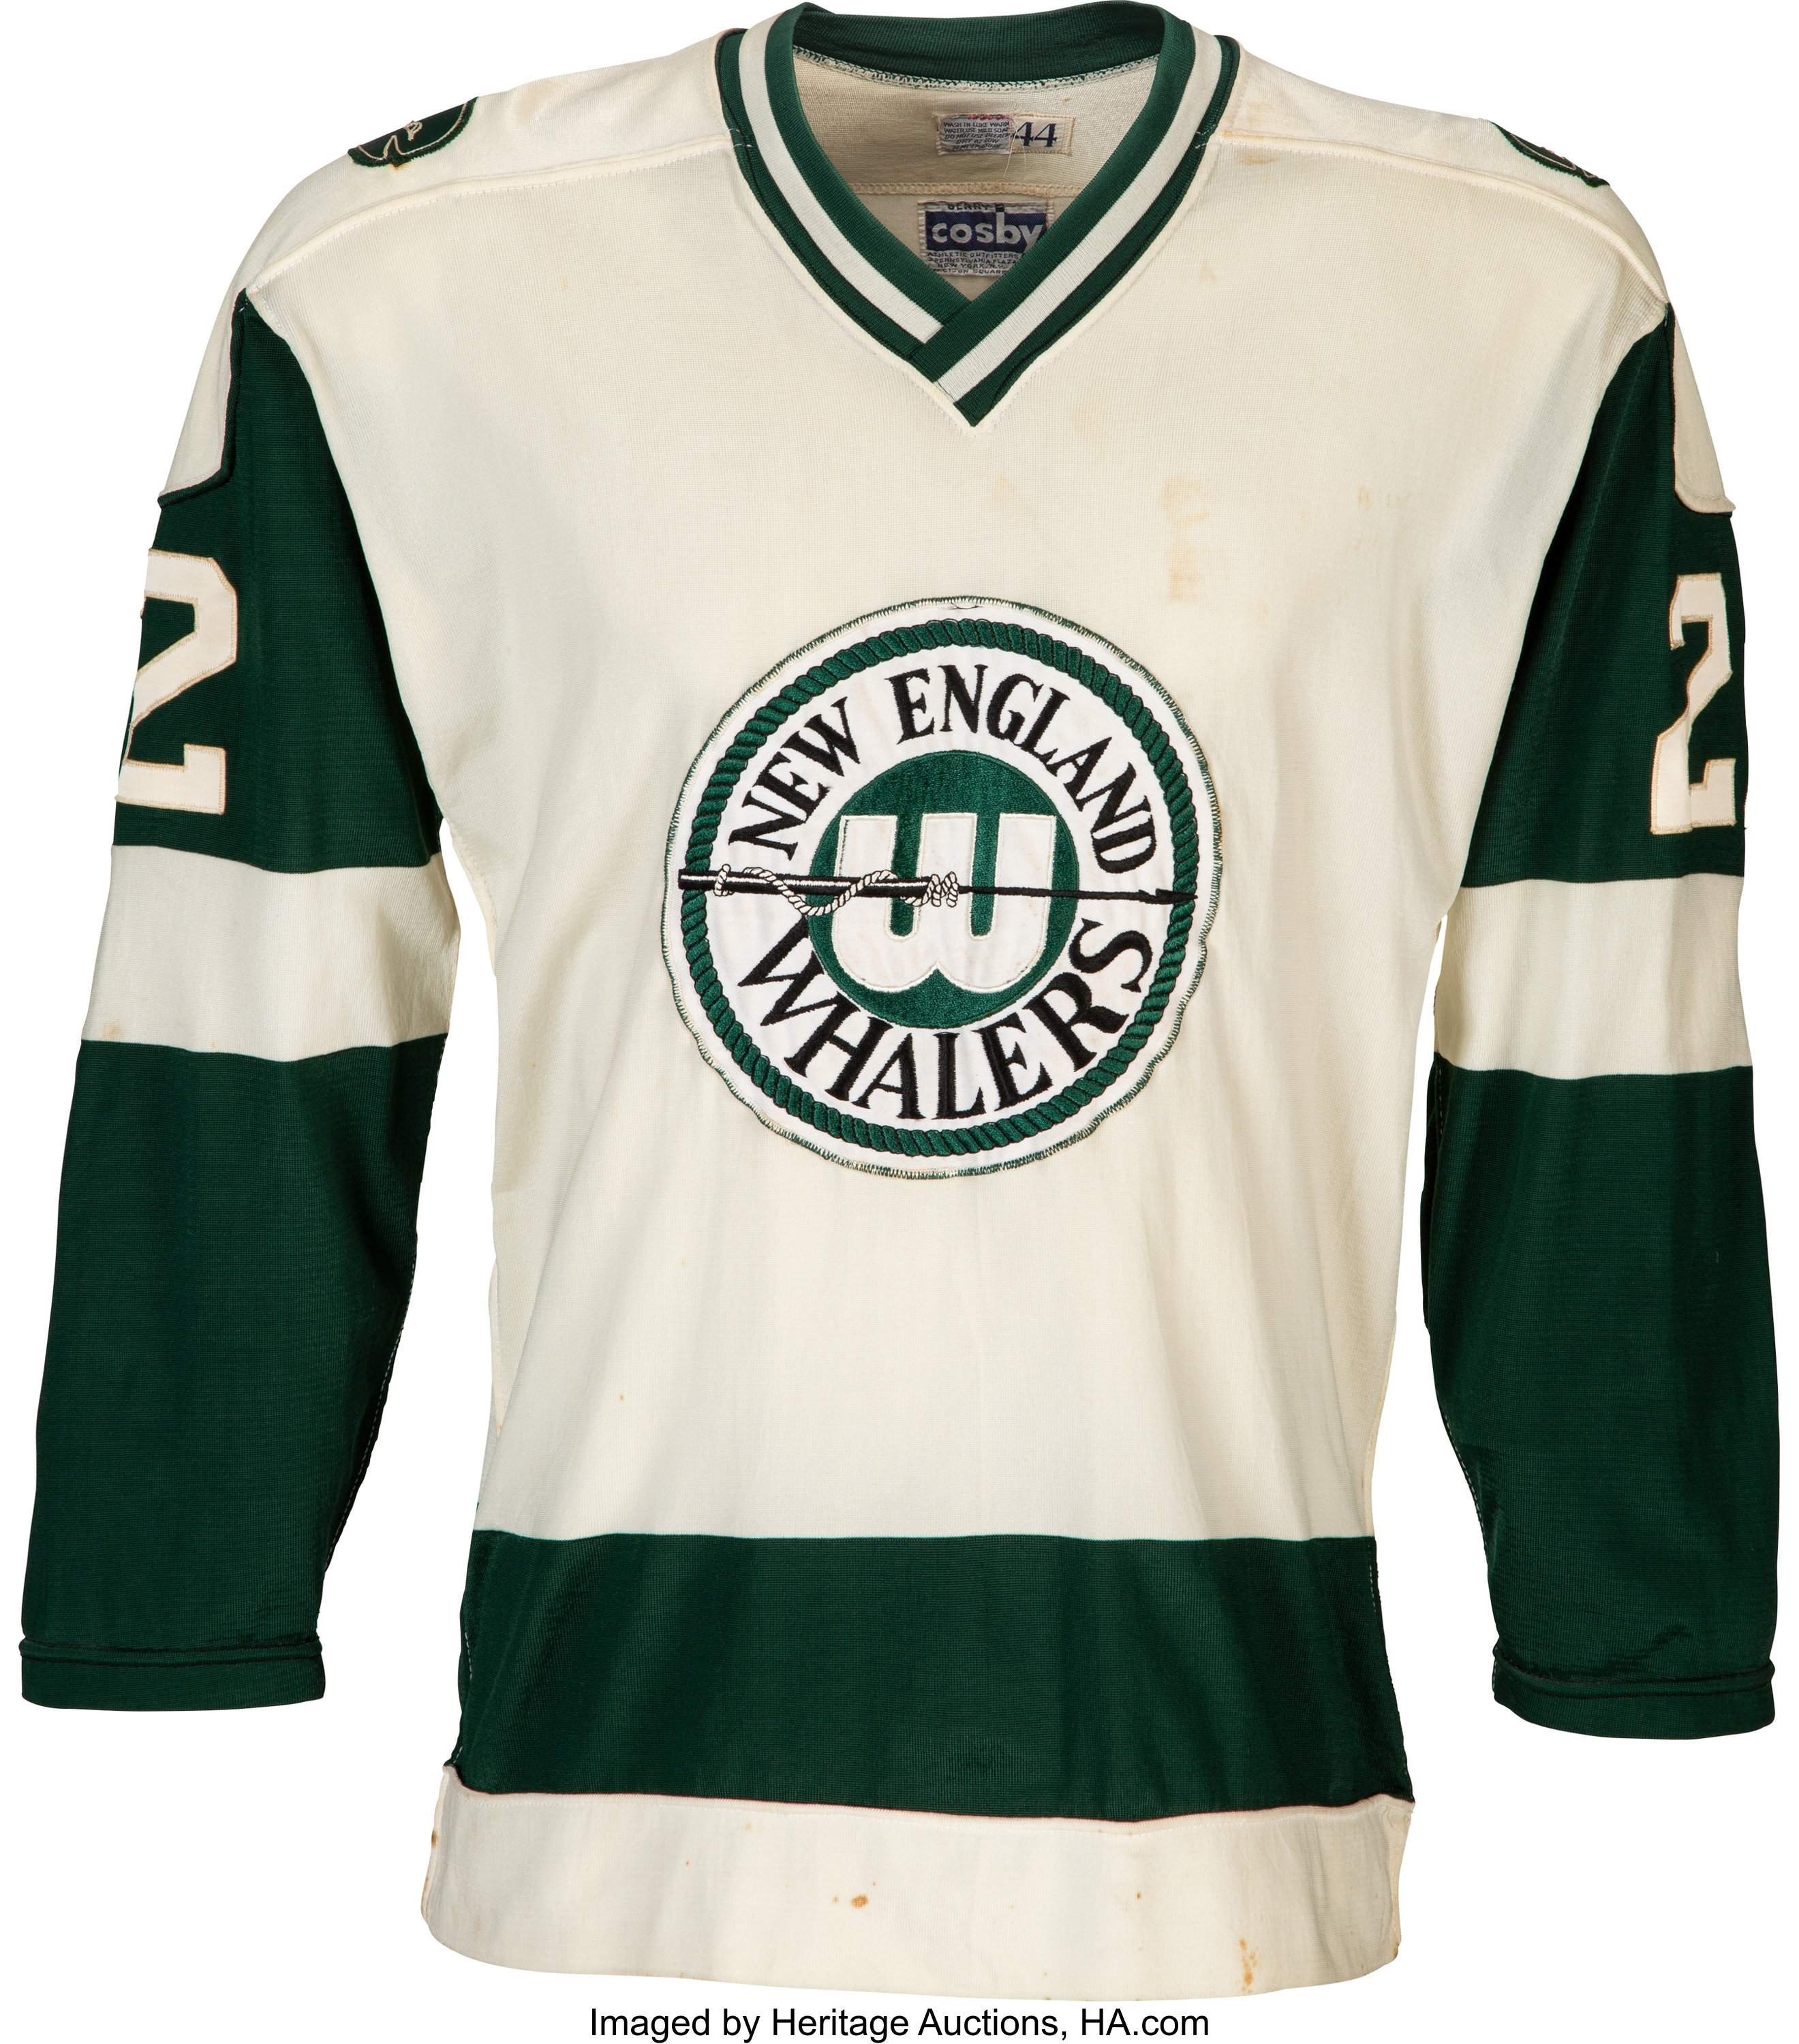 Green Whalers jerseys are 50% off at The Eye still. Had to grab